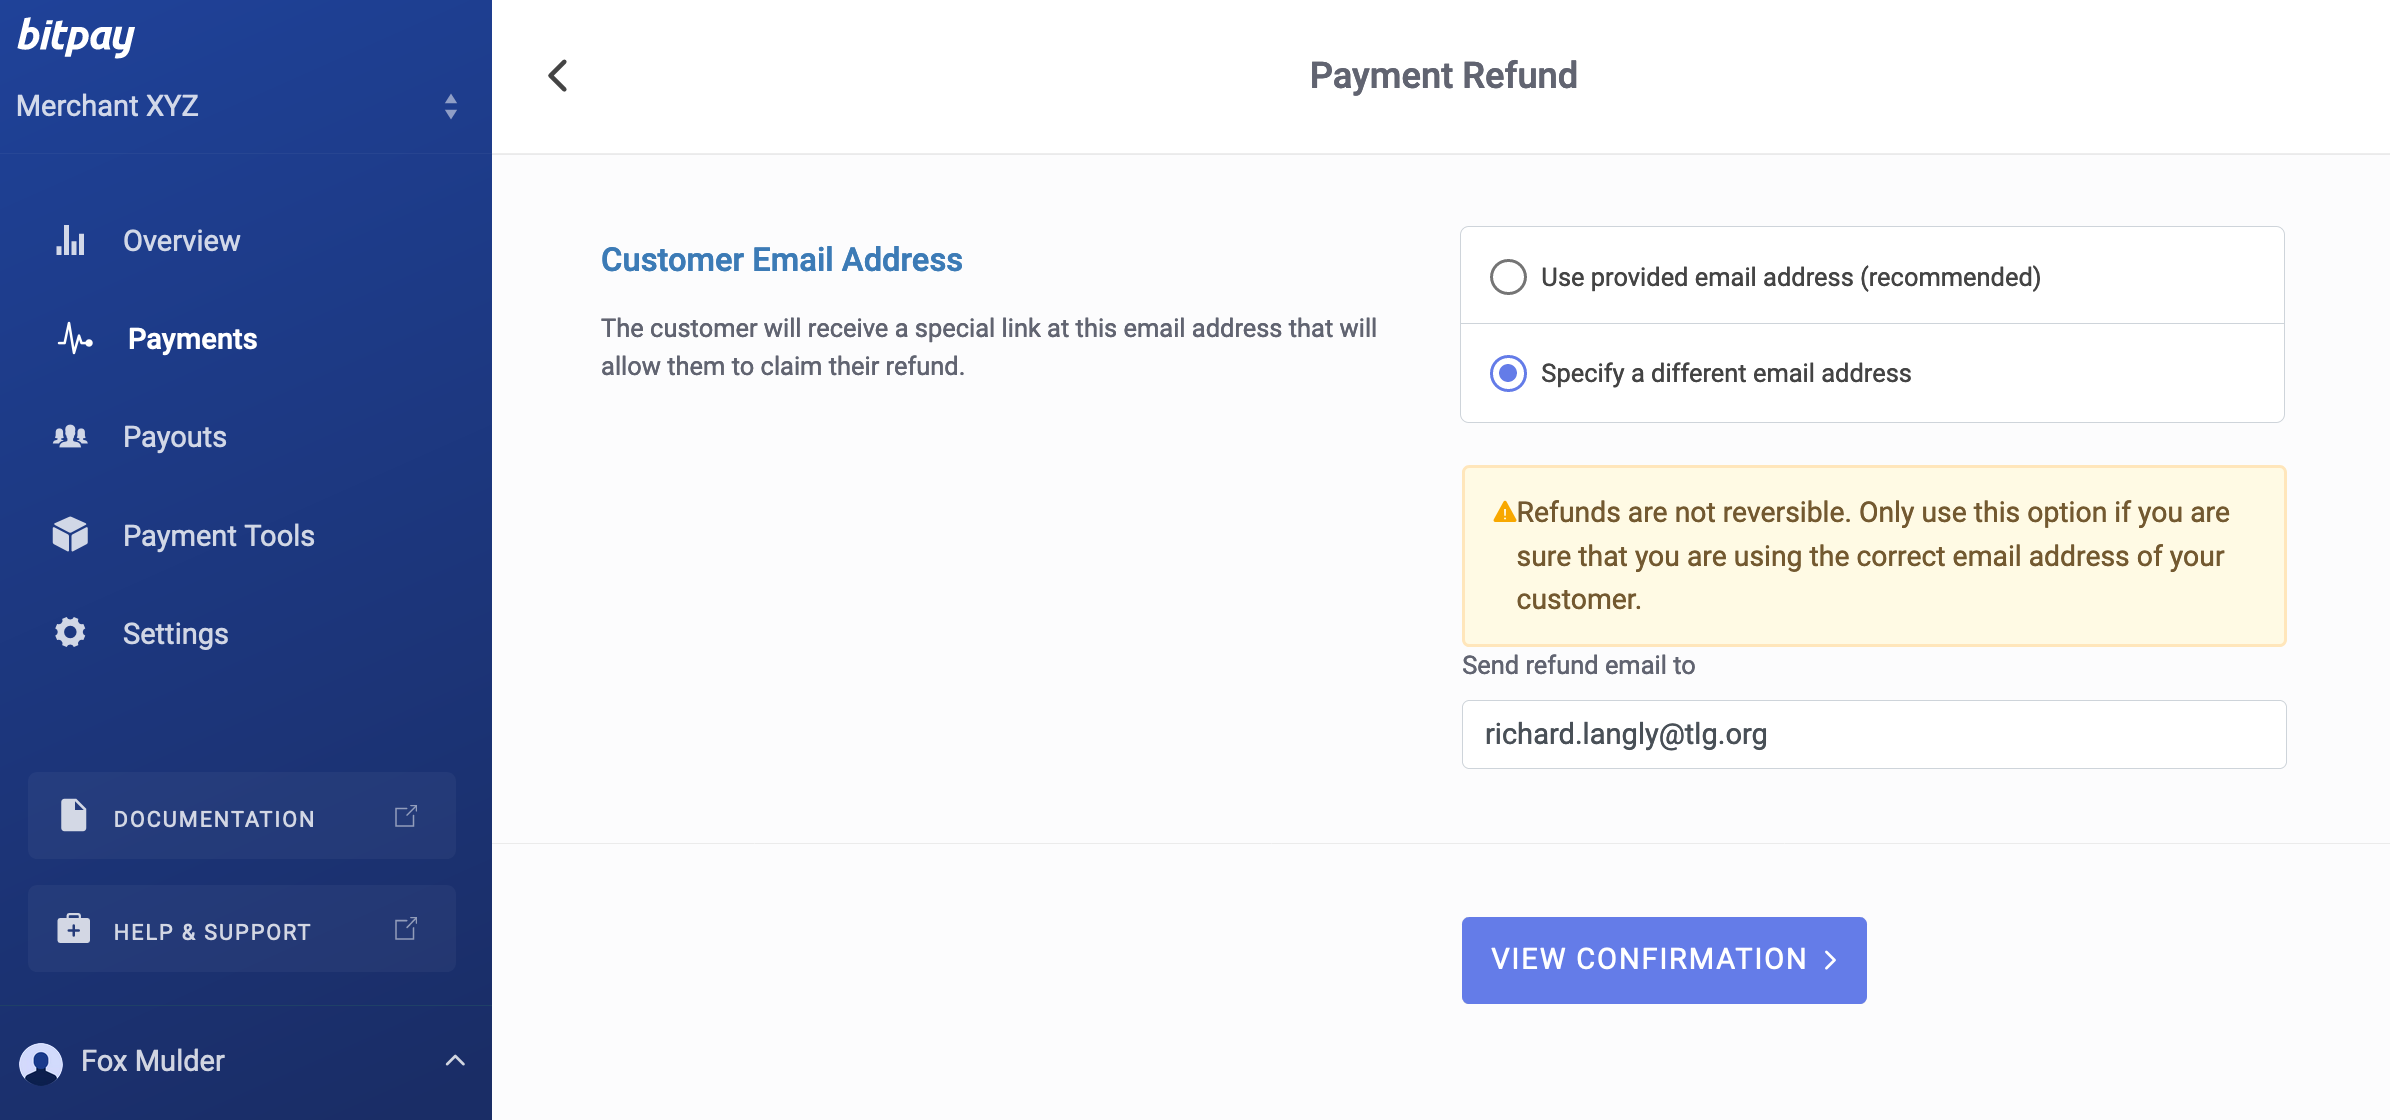 dashboard_payment_refund_email_change.png